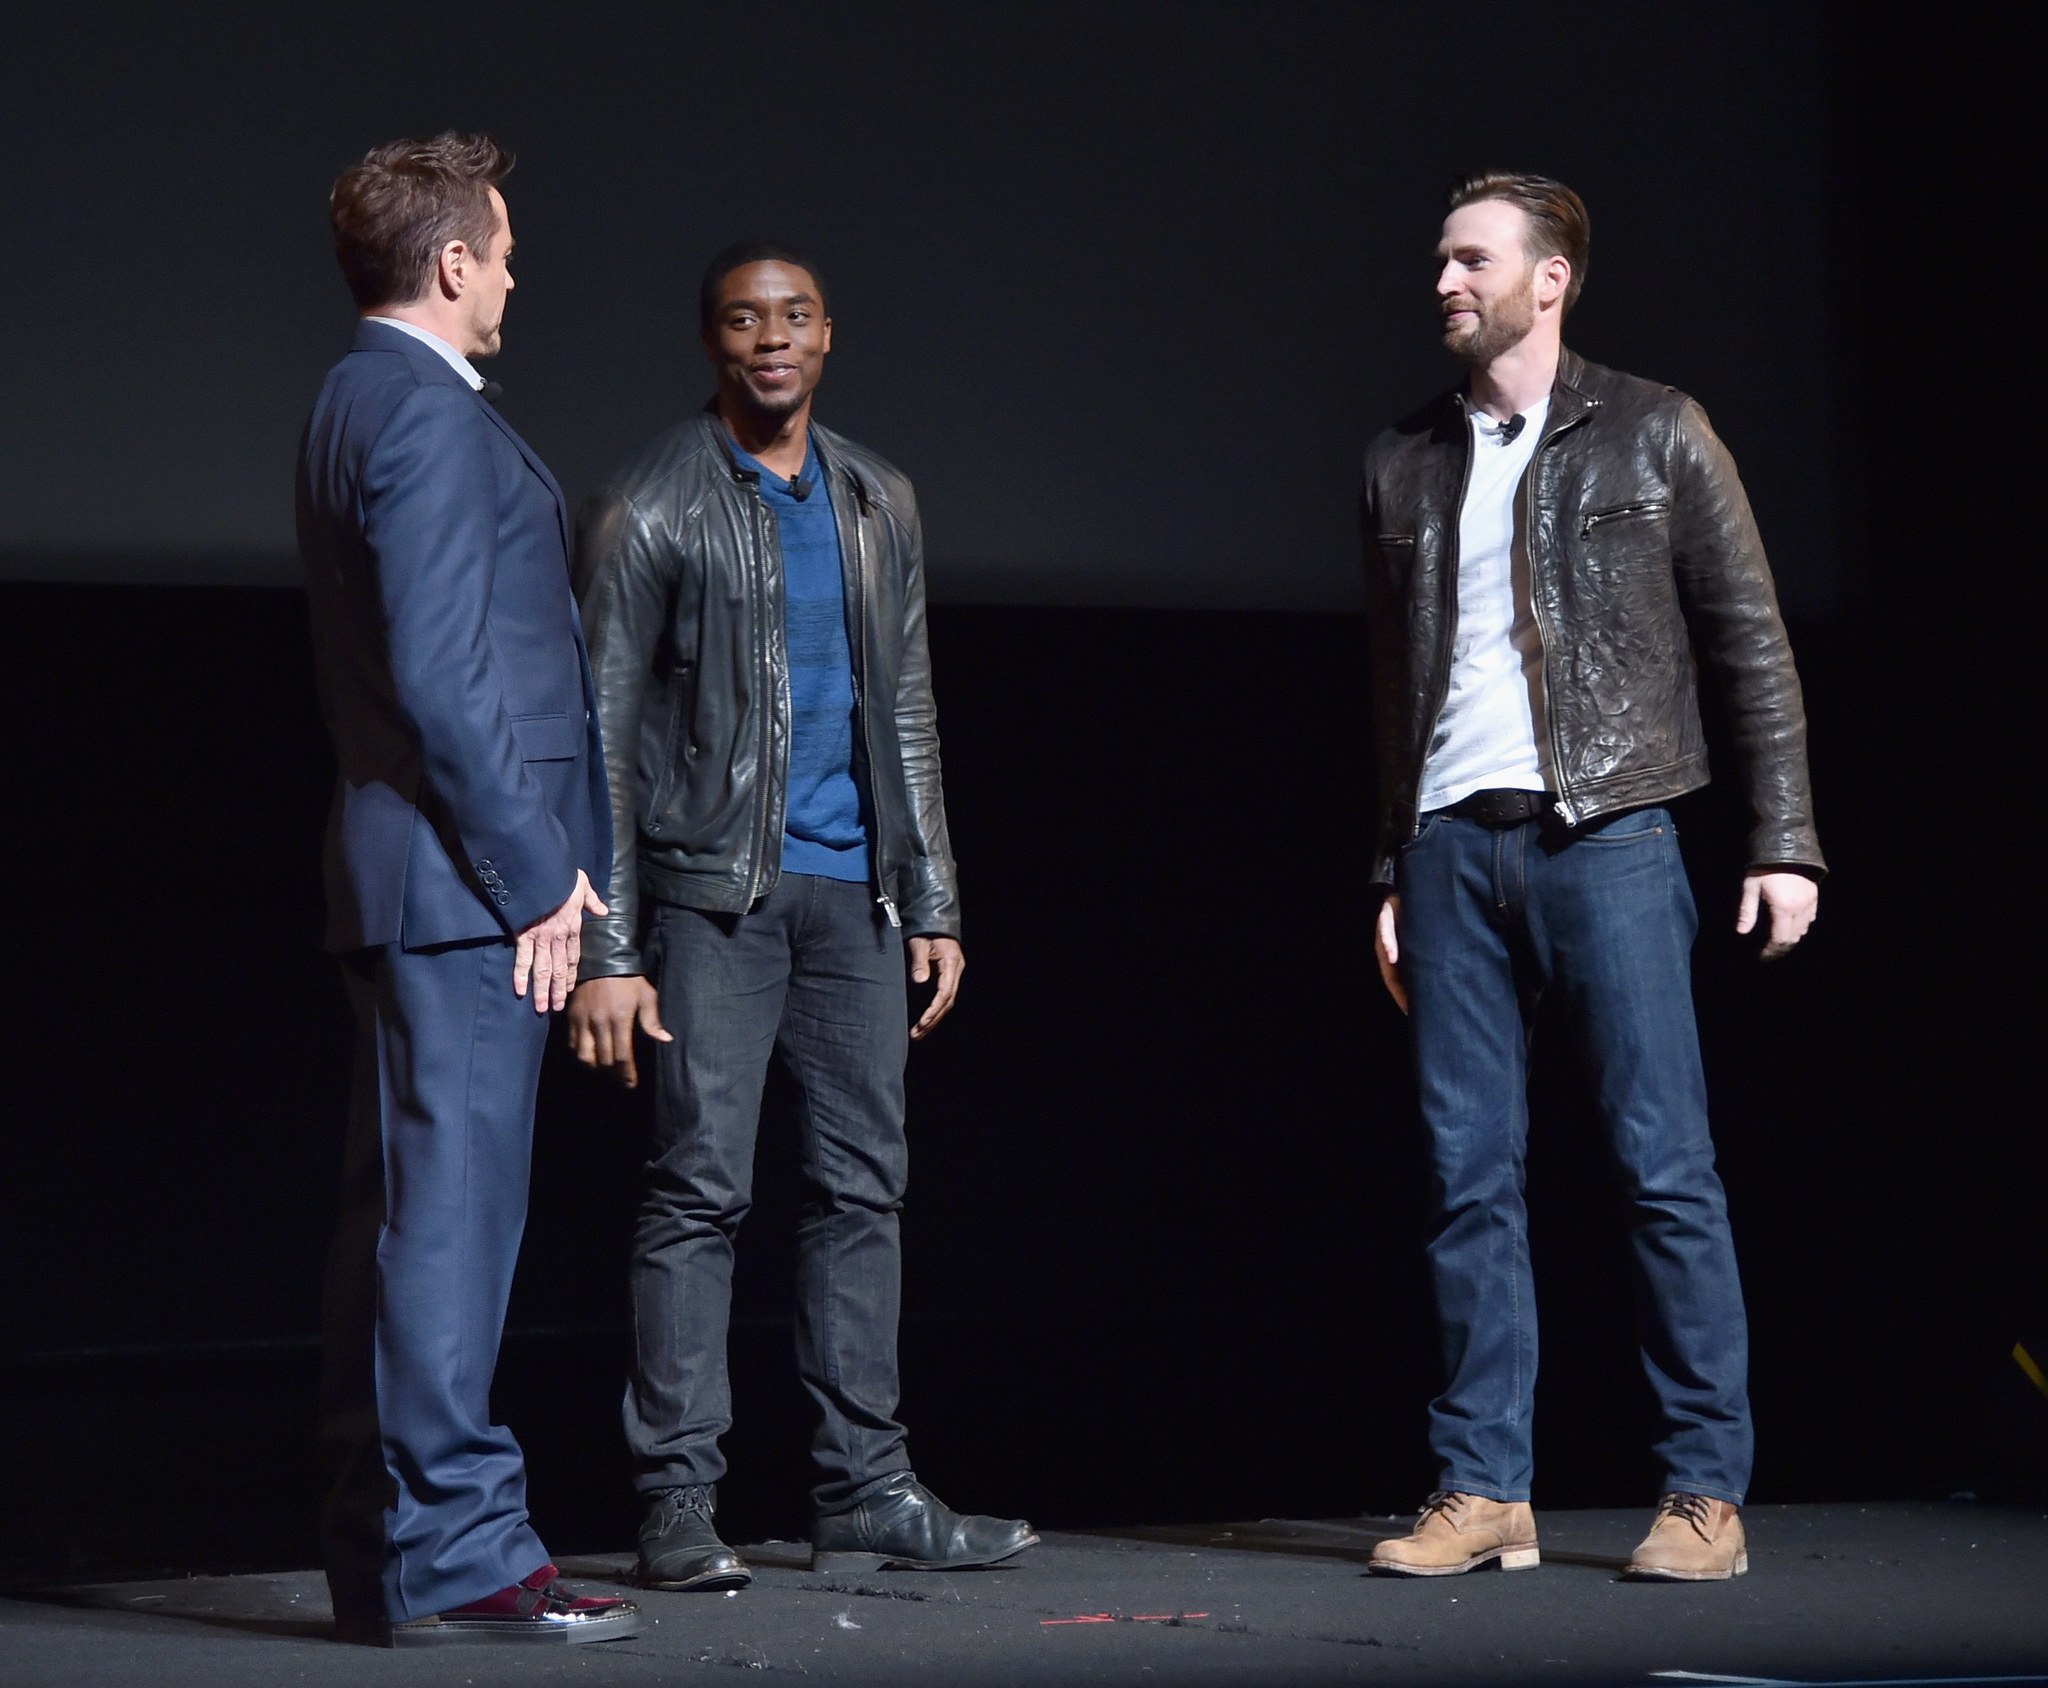 Robert Downey Jr., Chris Evans and Chadwick Boseman at event of Black Panther (2018)